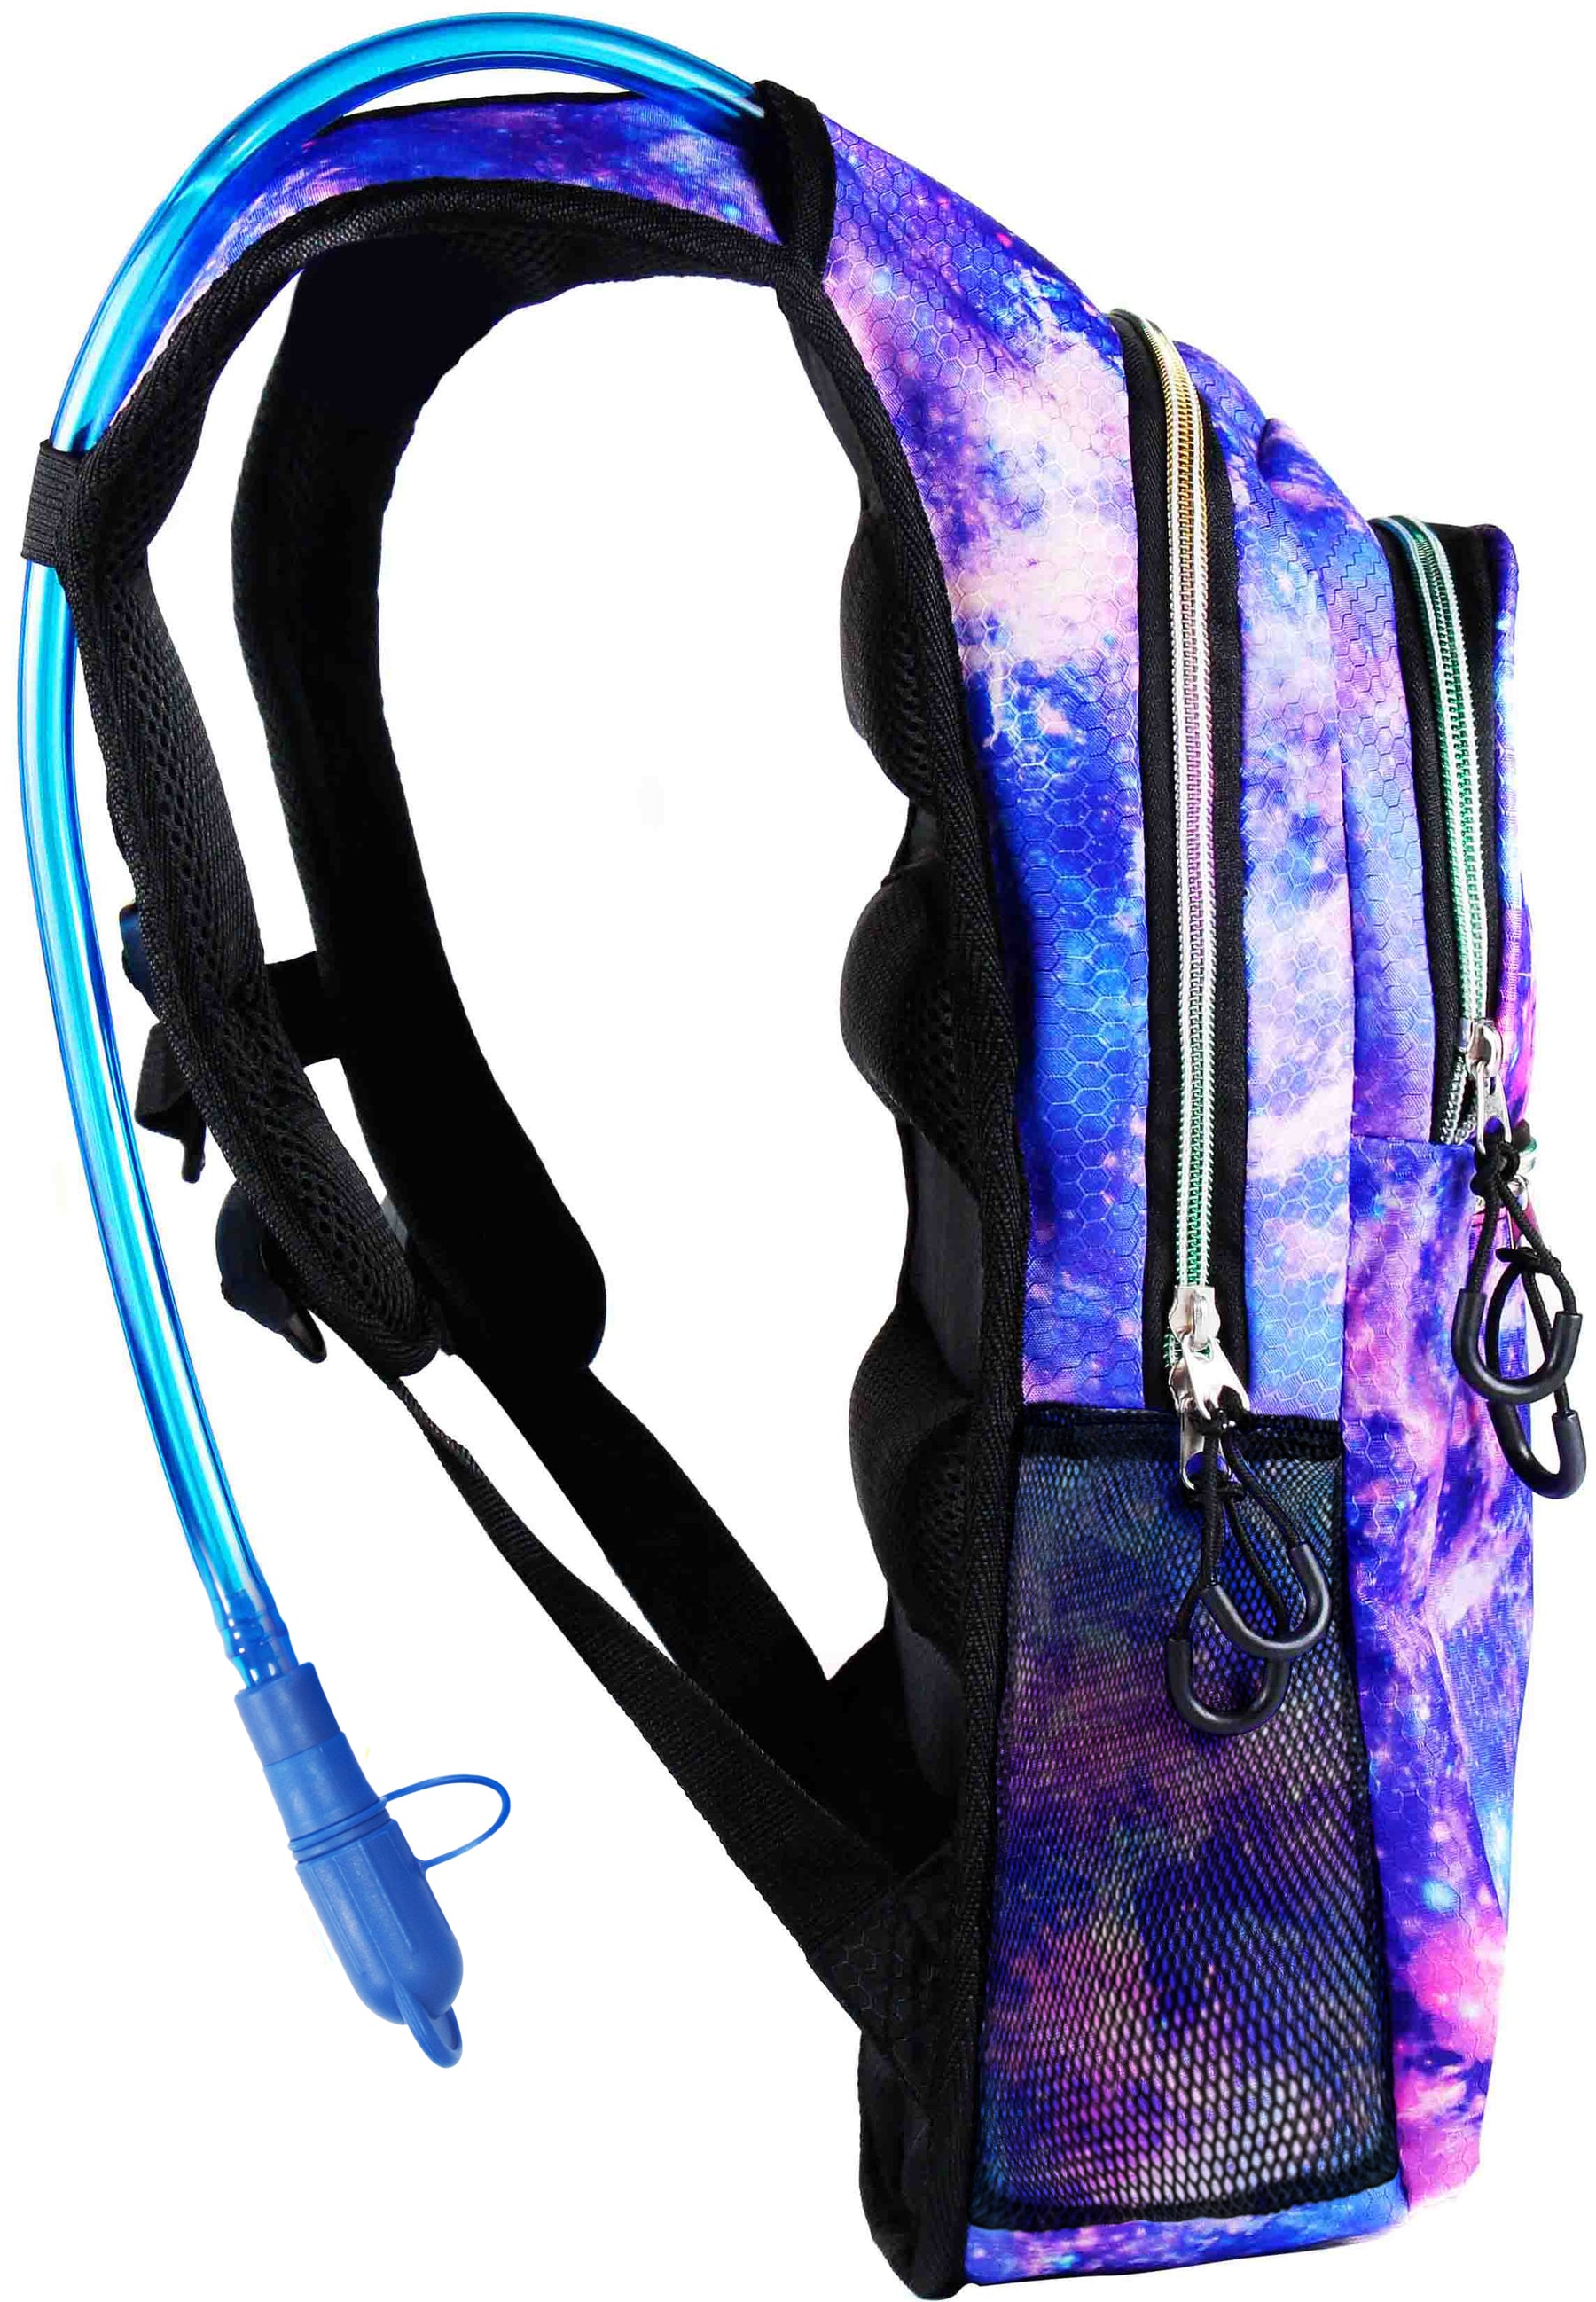 Fanny Pack Medium Hydration Pack Backpack - 2L Water Bladder - Galaxy - SoJourner Bags